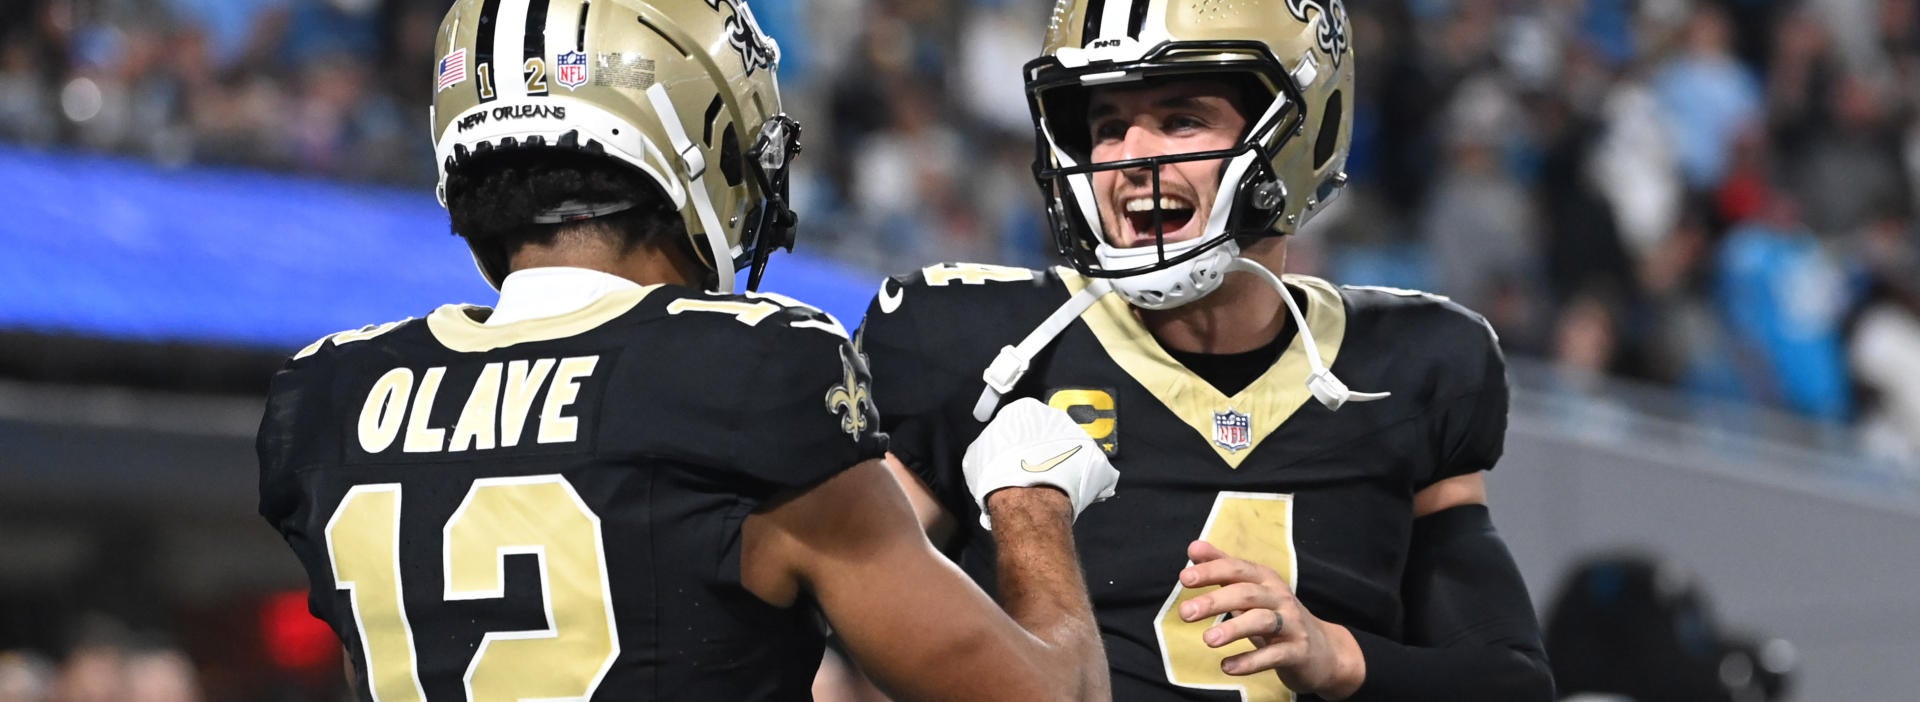 Week 4 NFL power ratings: How to value all 32 teams, including Saints without Derek Carr, for ATS picks